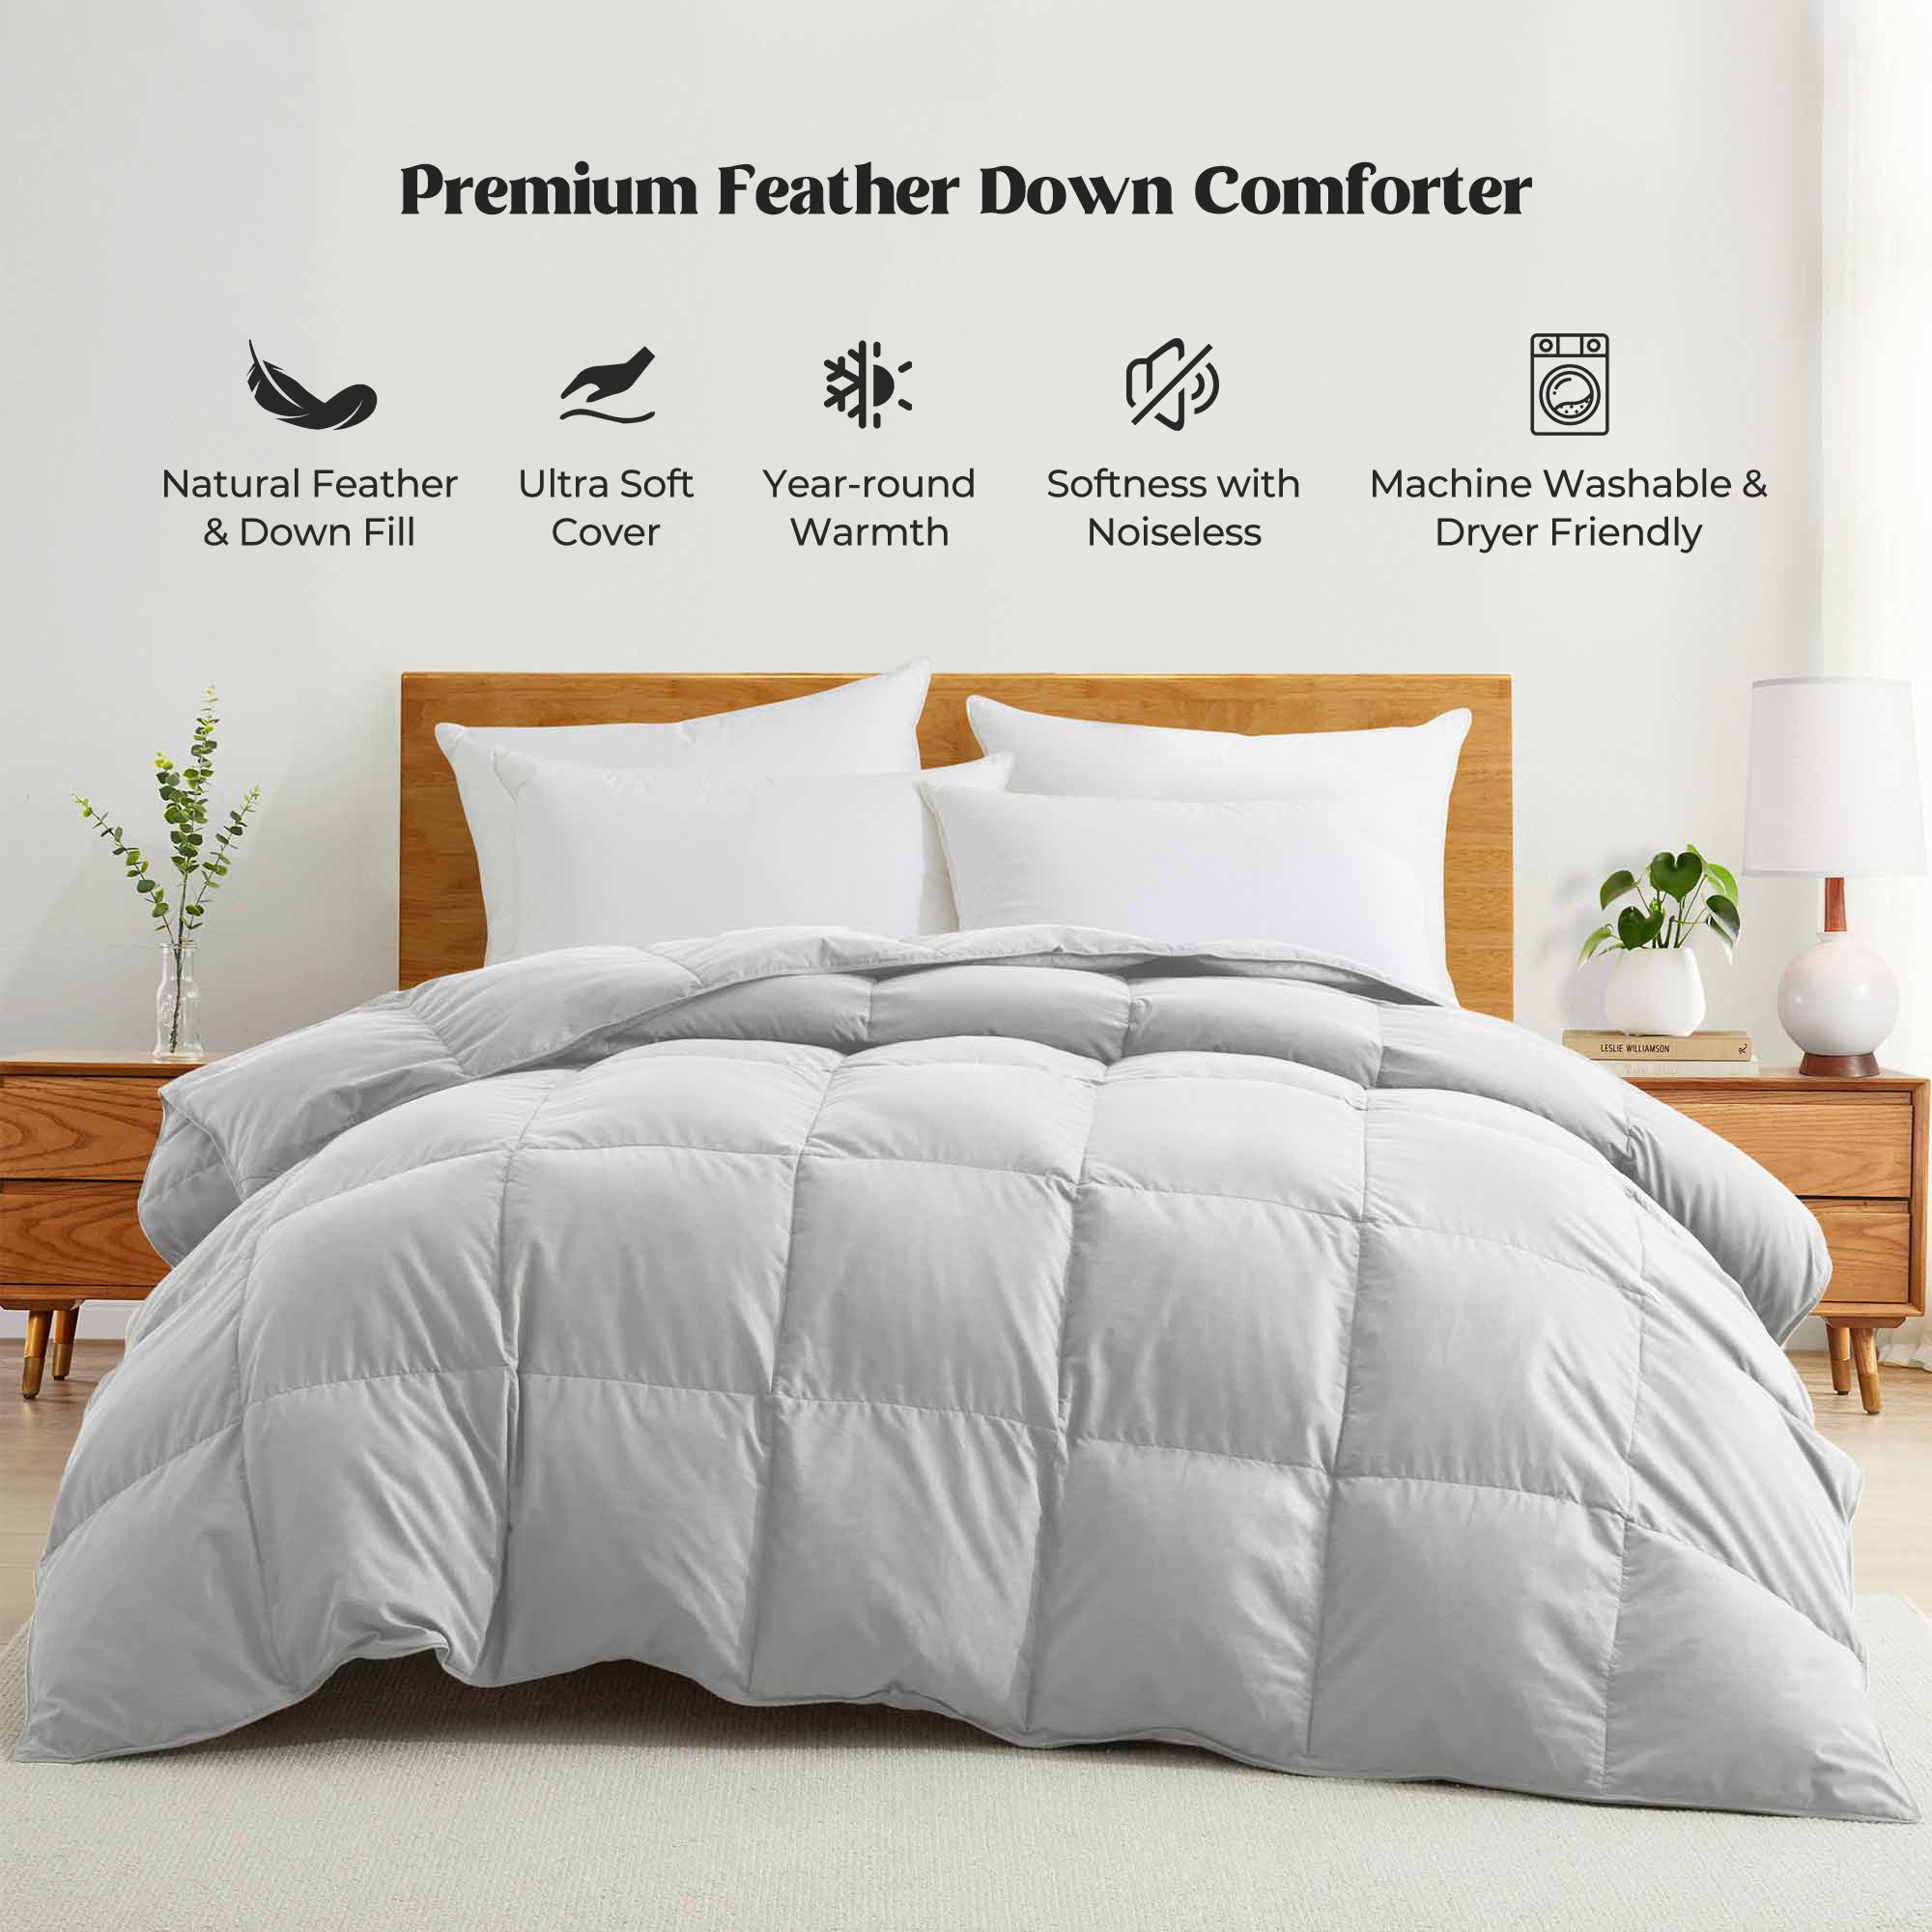 All Seasons Goose Down Feather Comforter Ultra Soft Comforter With Peach Skin Fabric - Nimbus Cloud, Full/Queen-88*88